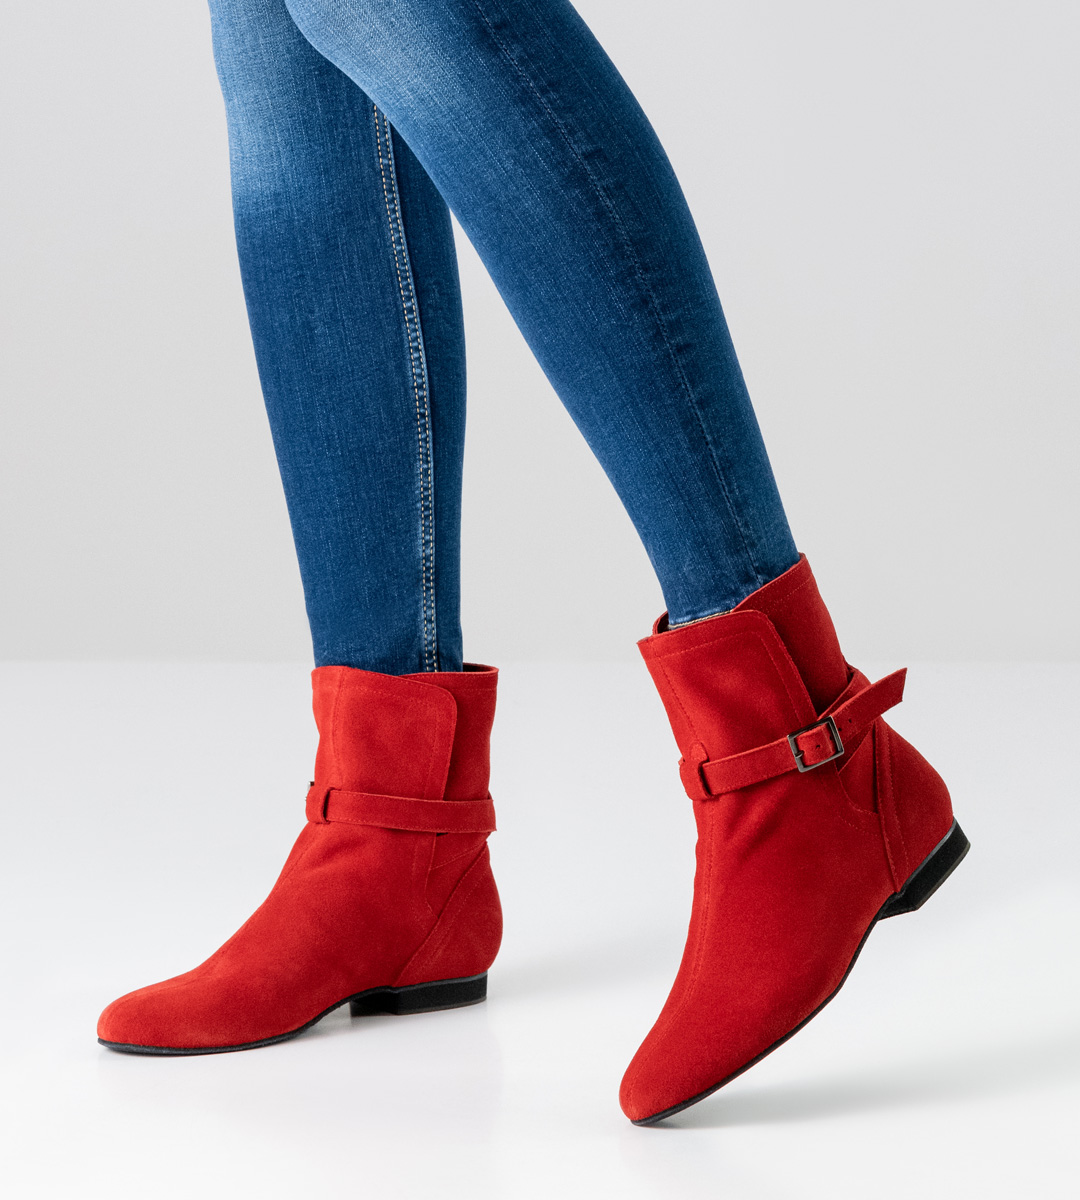 Linedance dance boots with 1.5 cm high heel in combination with blue jeans